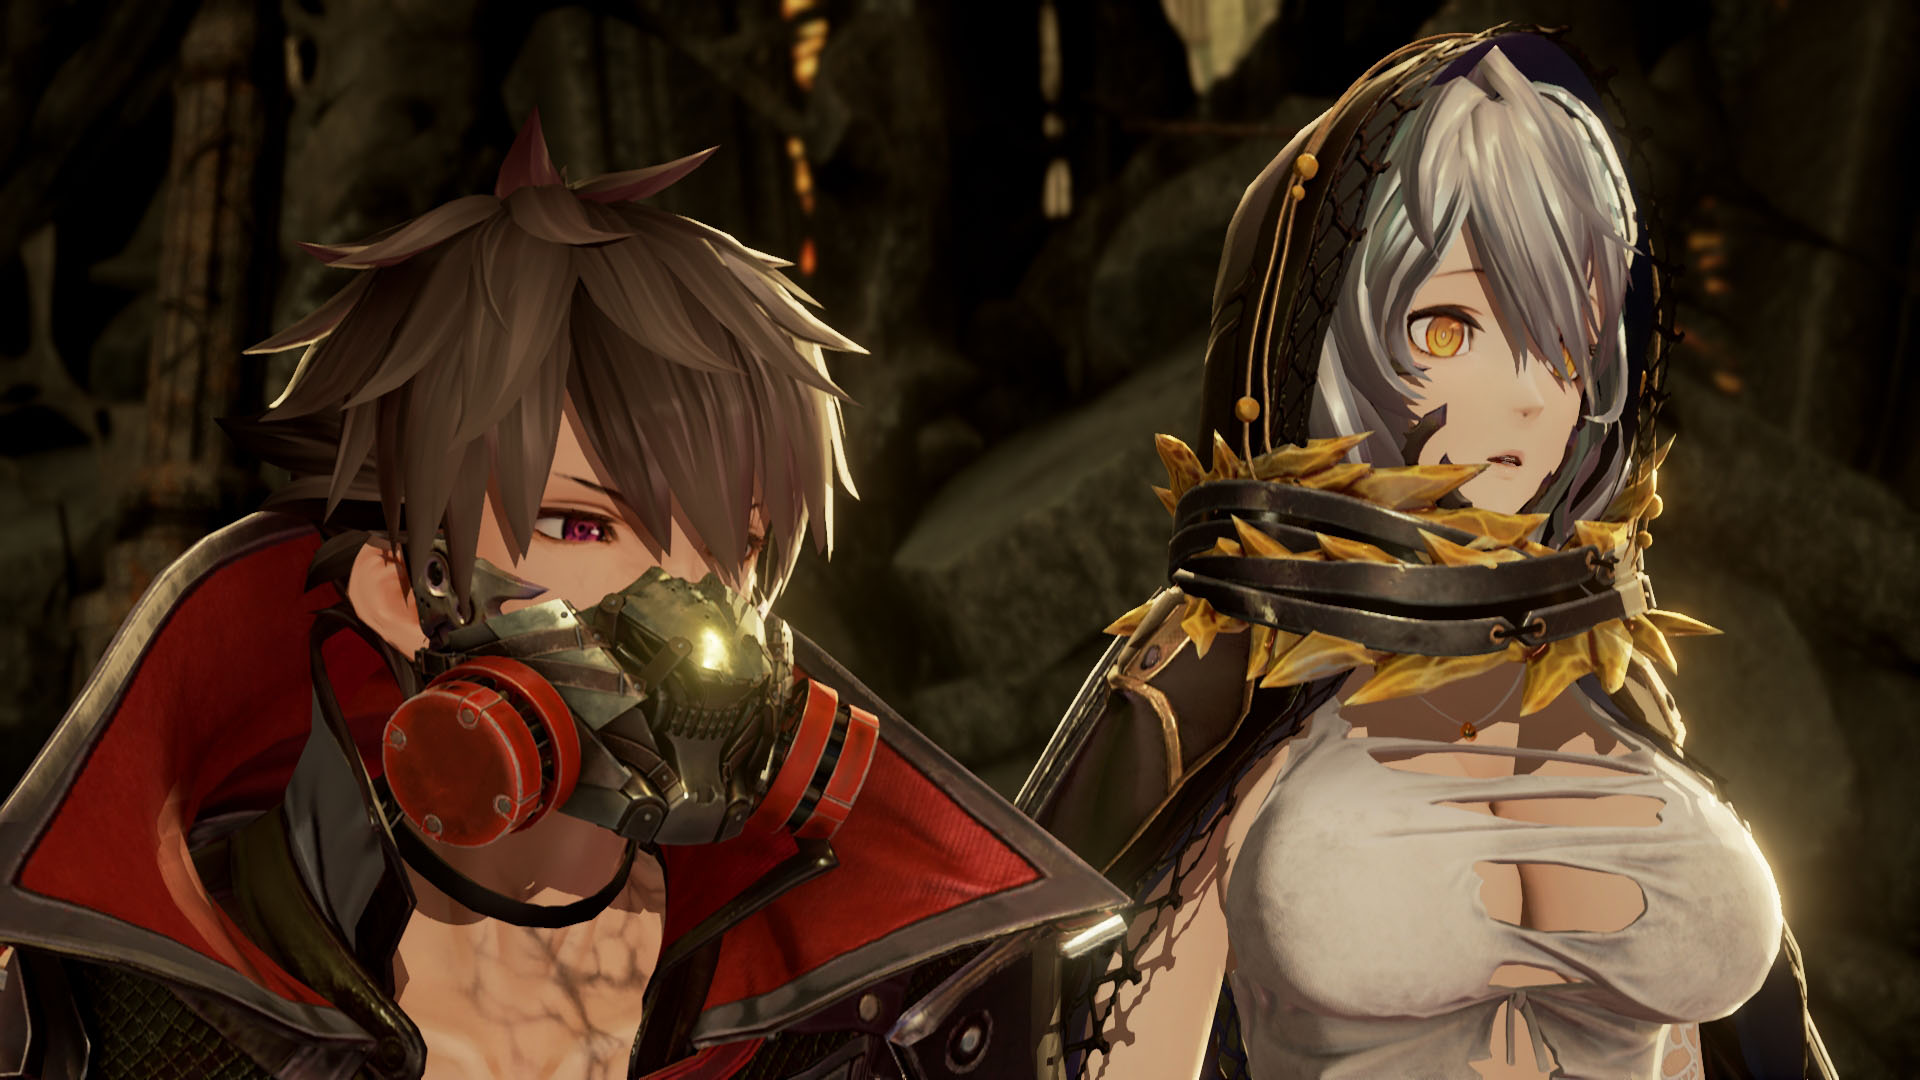 CODE VEIN DLC 1 available now!